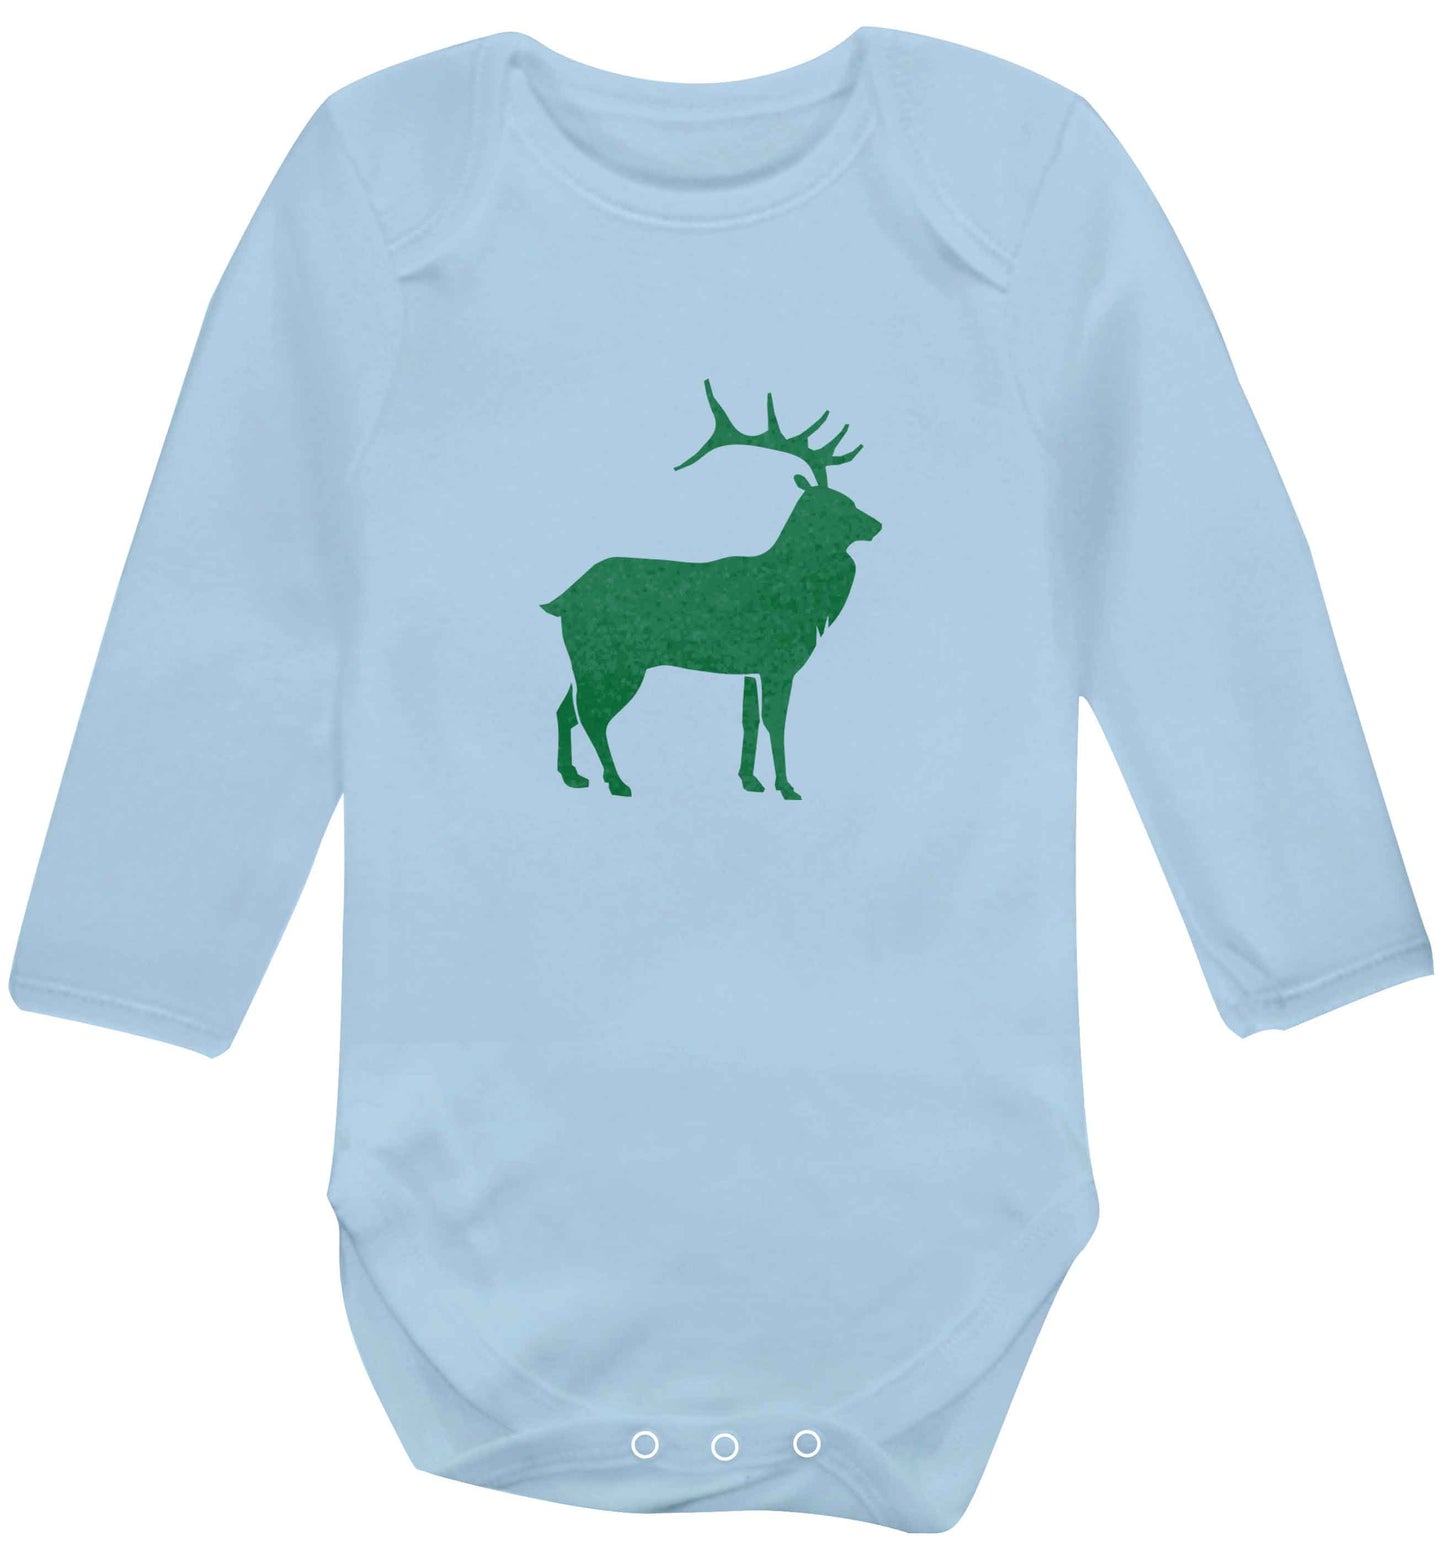 Green stag baby vest long sleeved pale blue 6-12 months